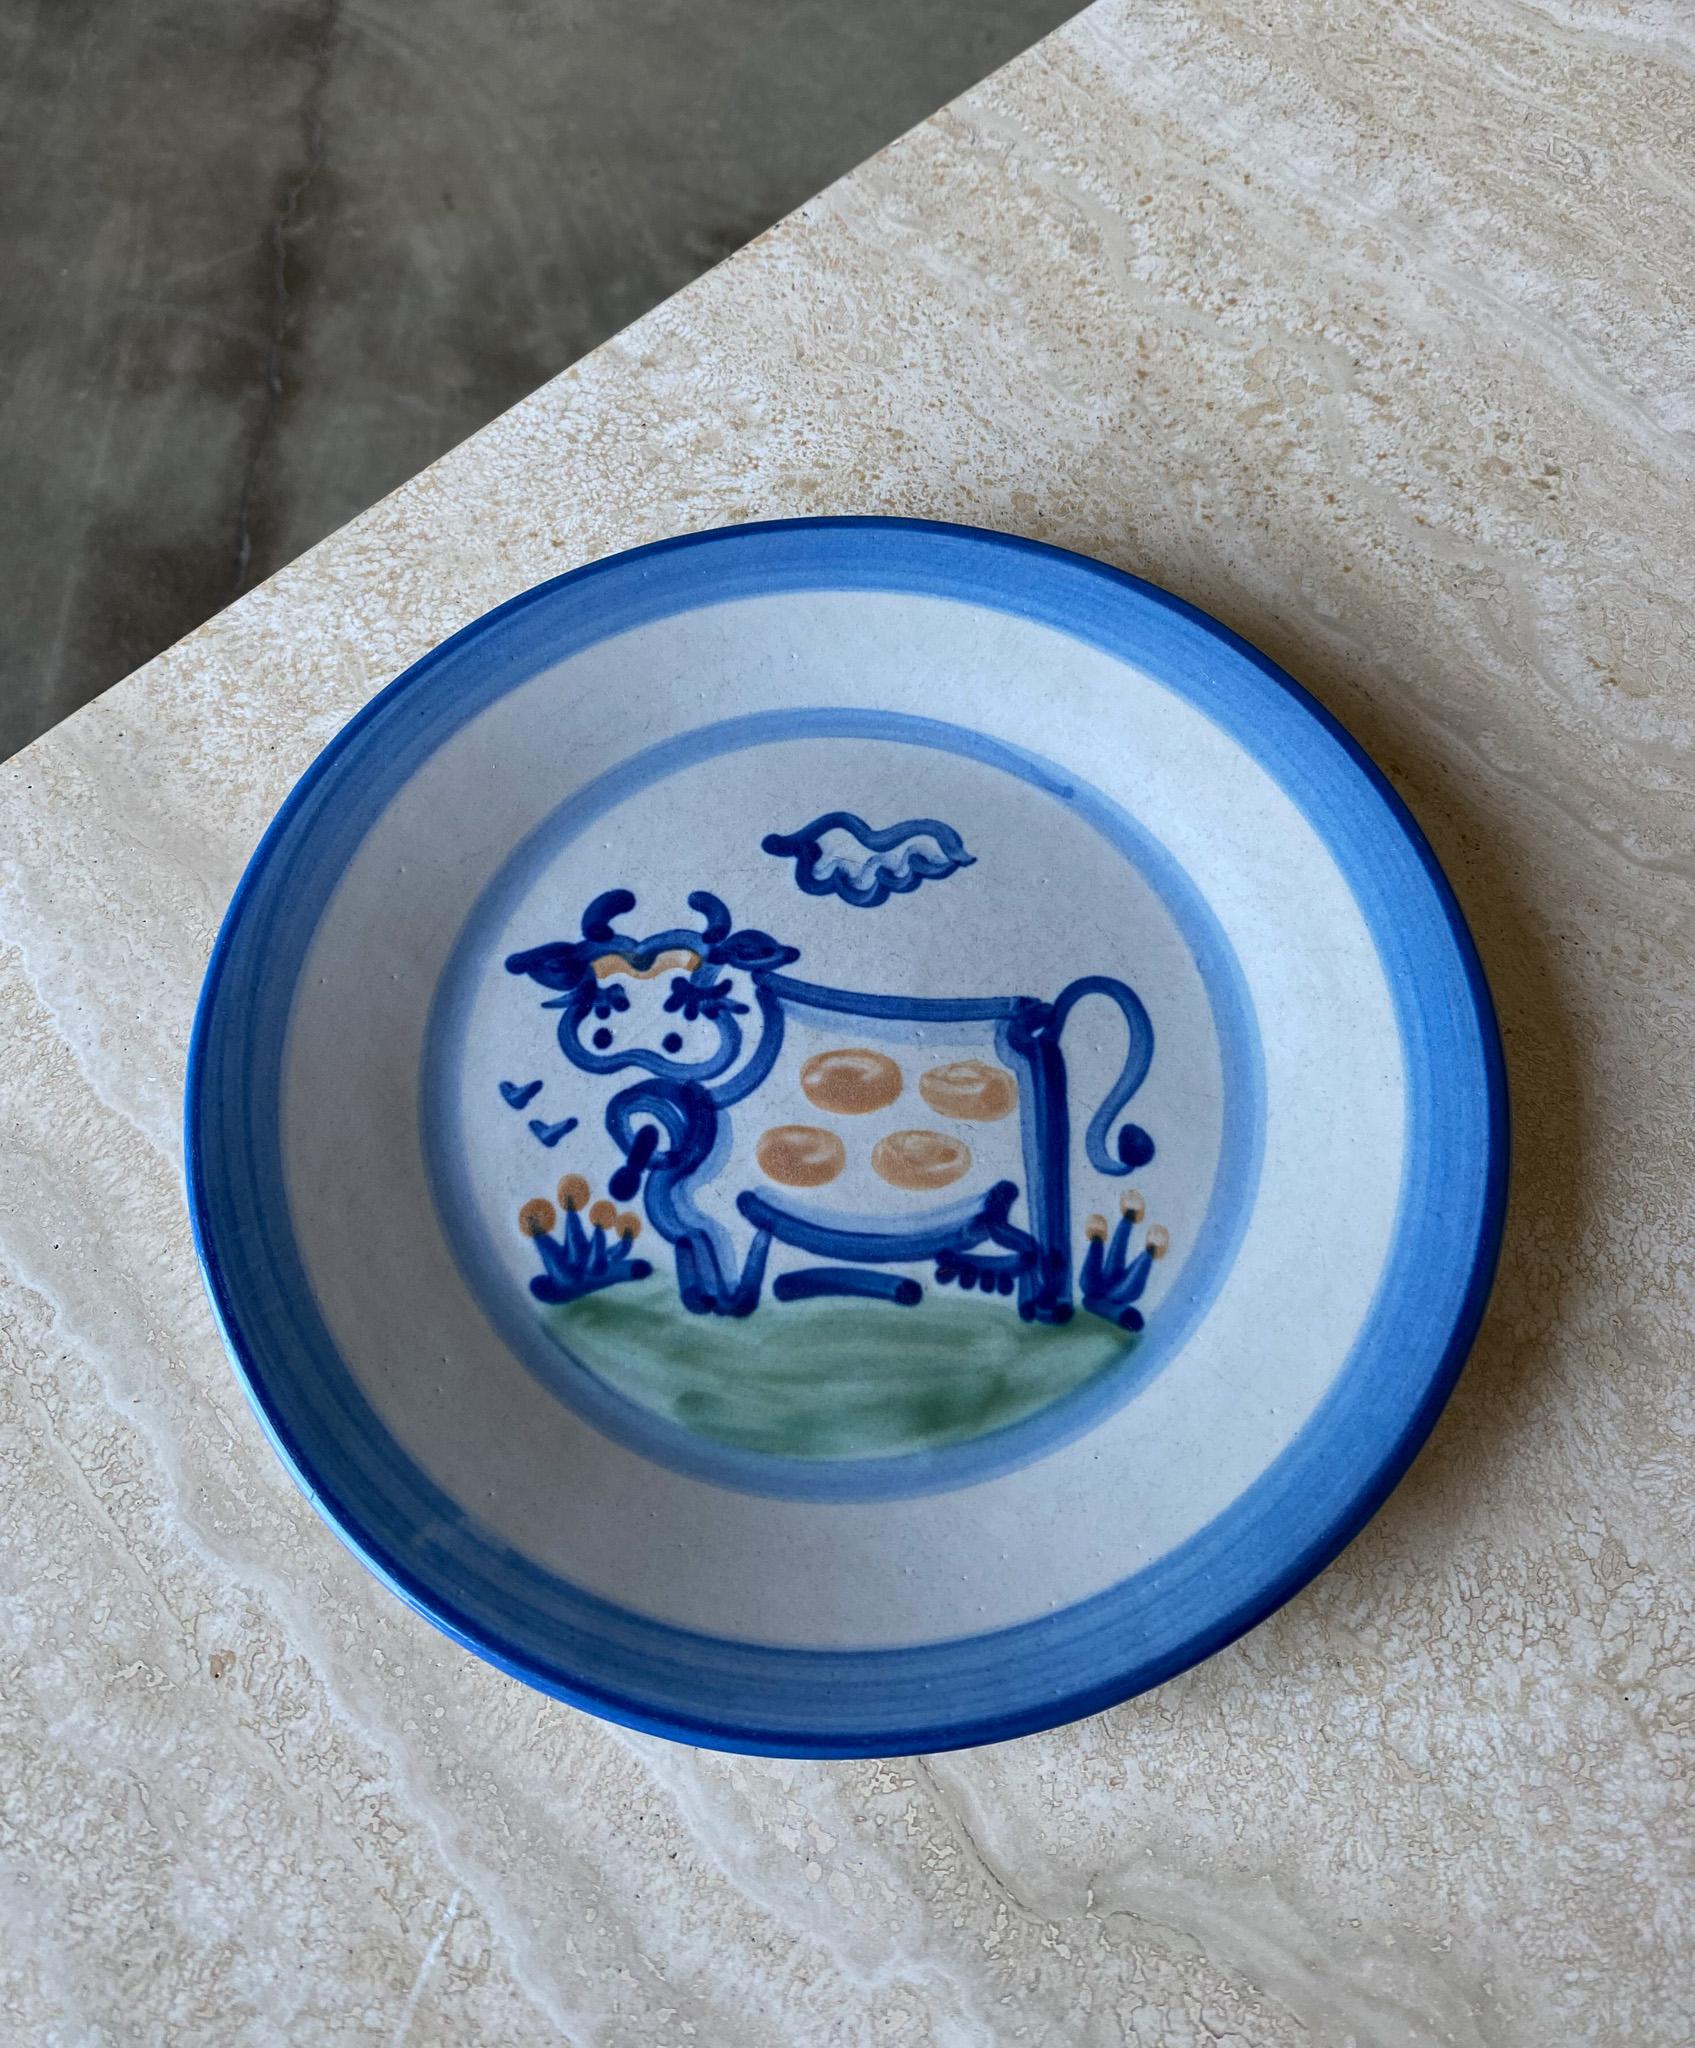 M.A. Hadley Cow Dish / Plate, United States,  20th Century. 